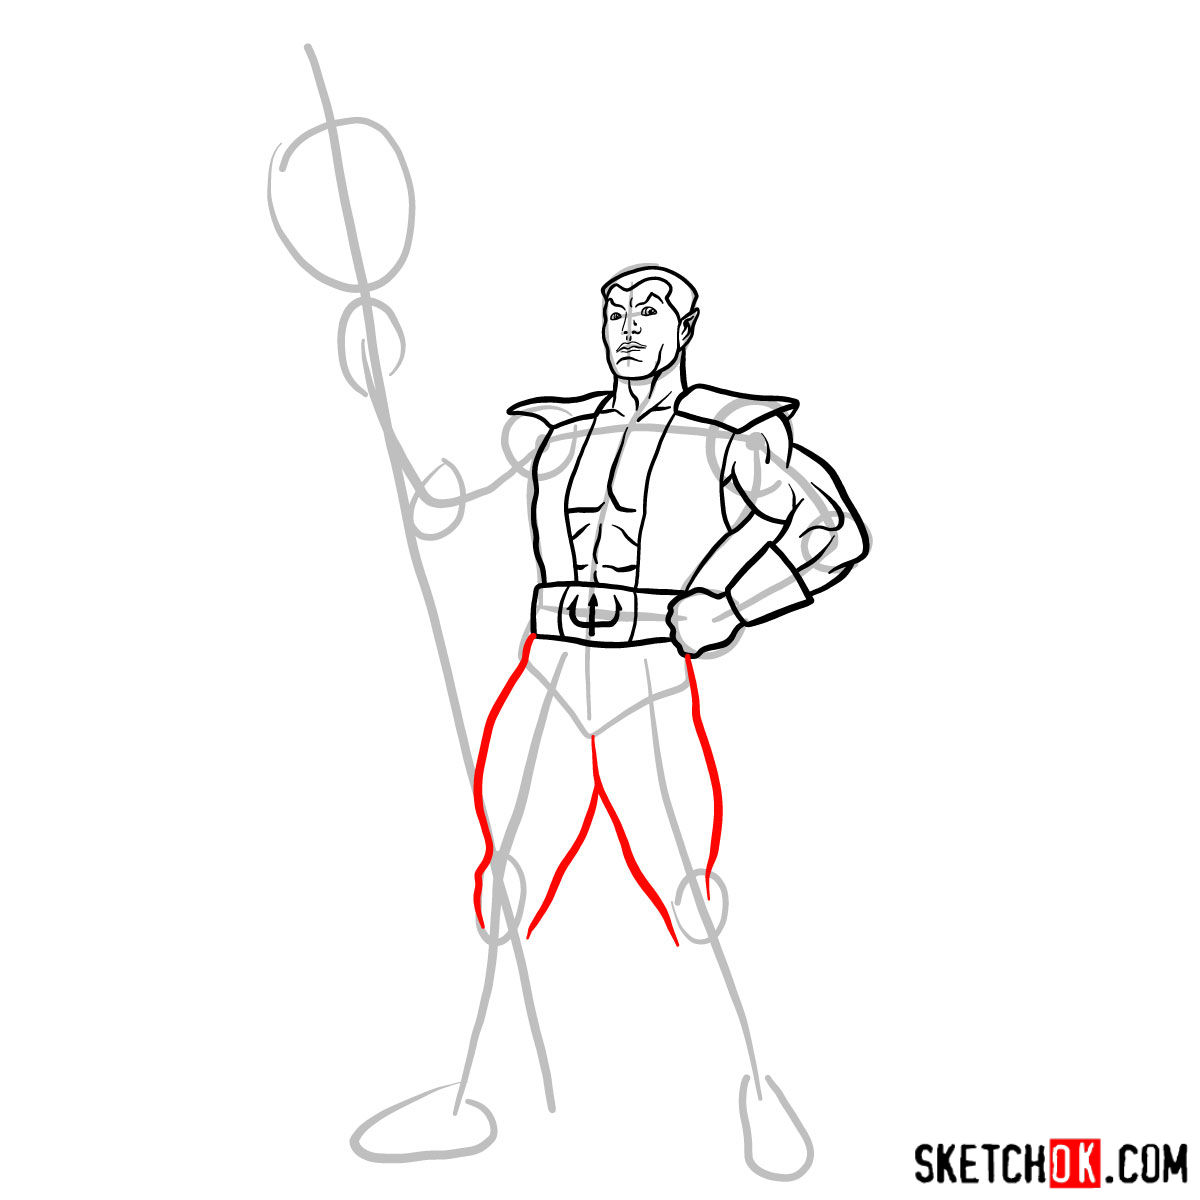 How to draw Namor the Sub-Mariner from Marvel Comics - step 10